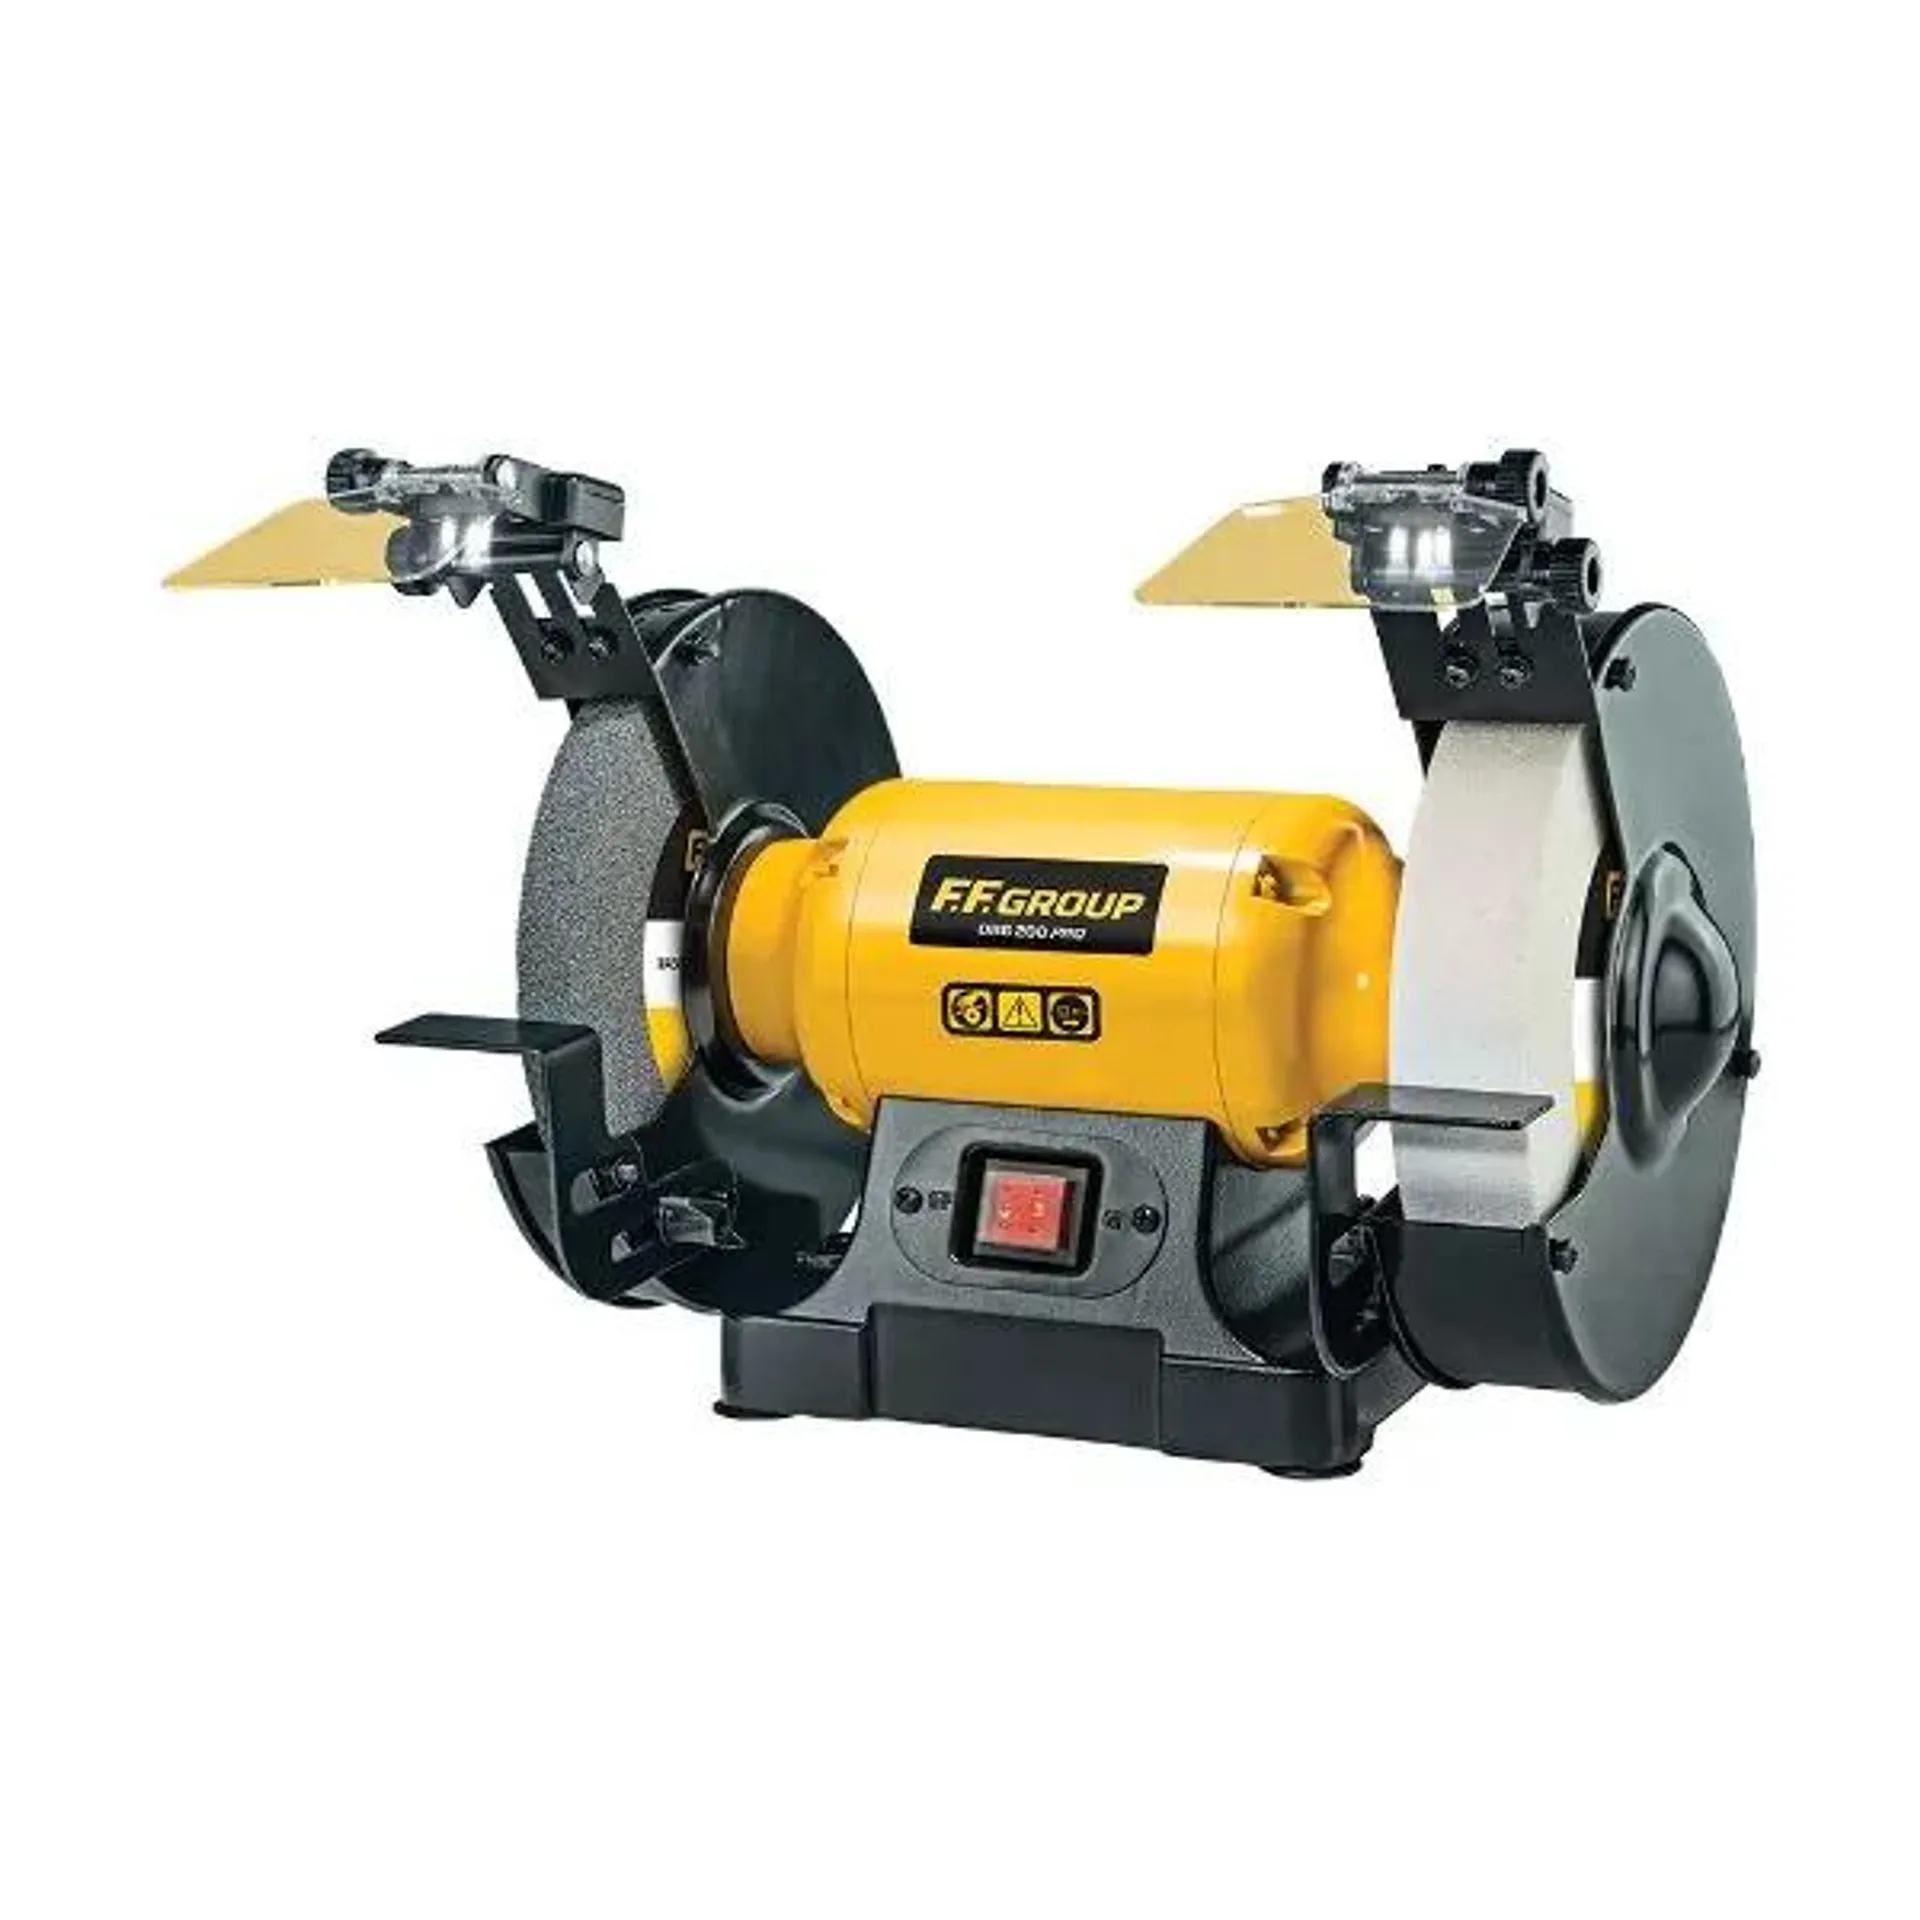 DOUBLE WHEELED BENCH GRINDER DBG 200 PRO 500W FF GROUP